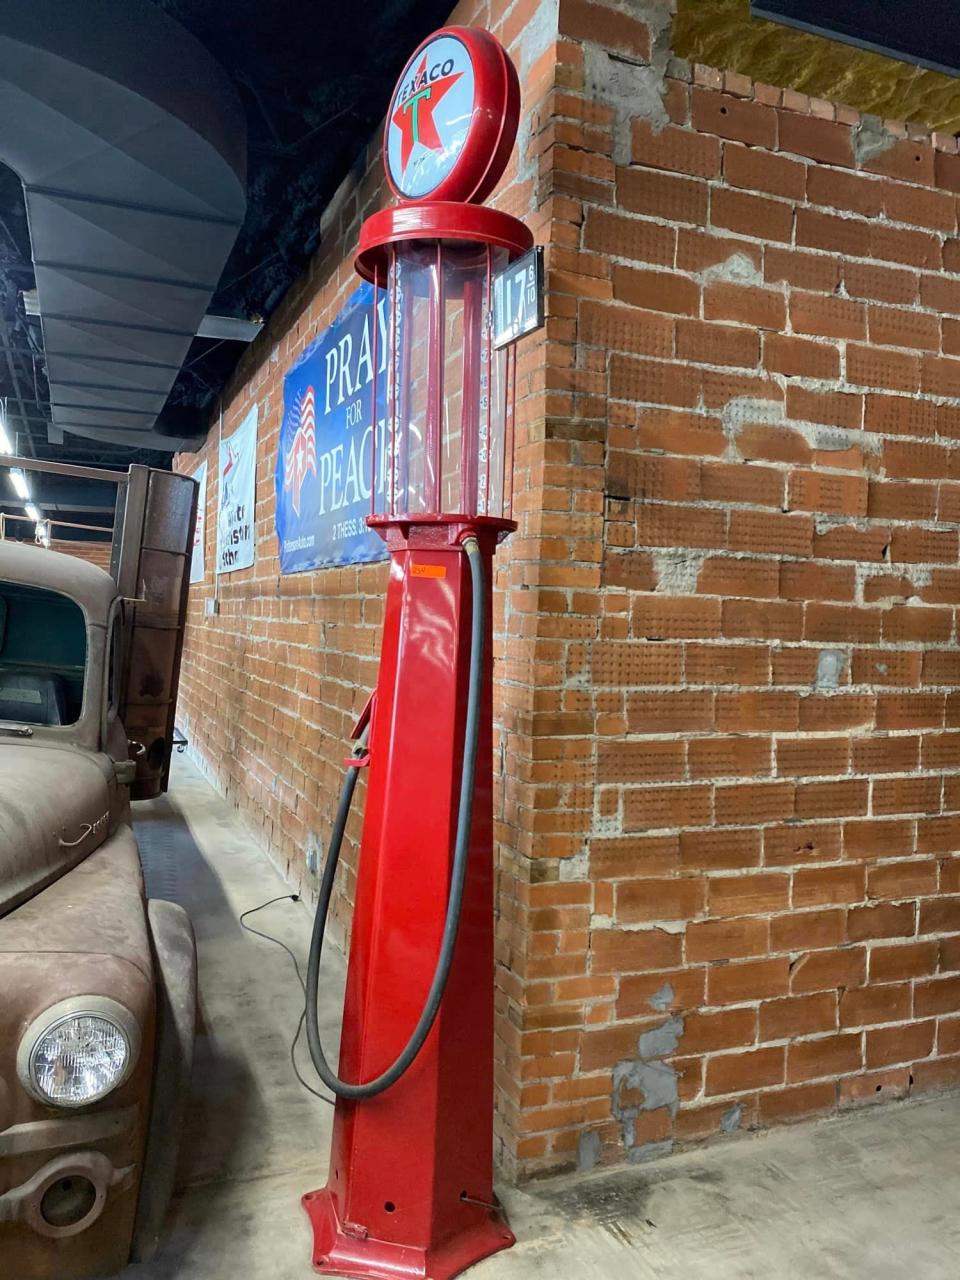 An early day gasoline pump will be among items sold this month at Harry Patterson's Crazy Cars Museum.